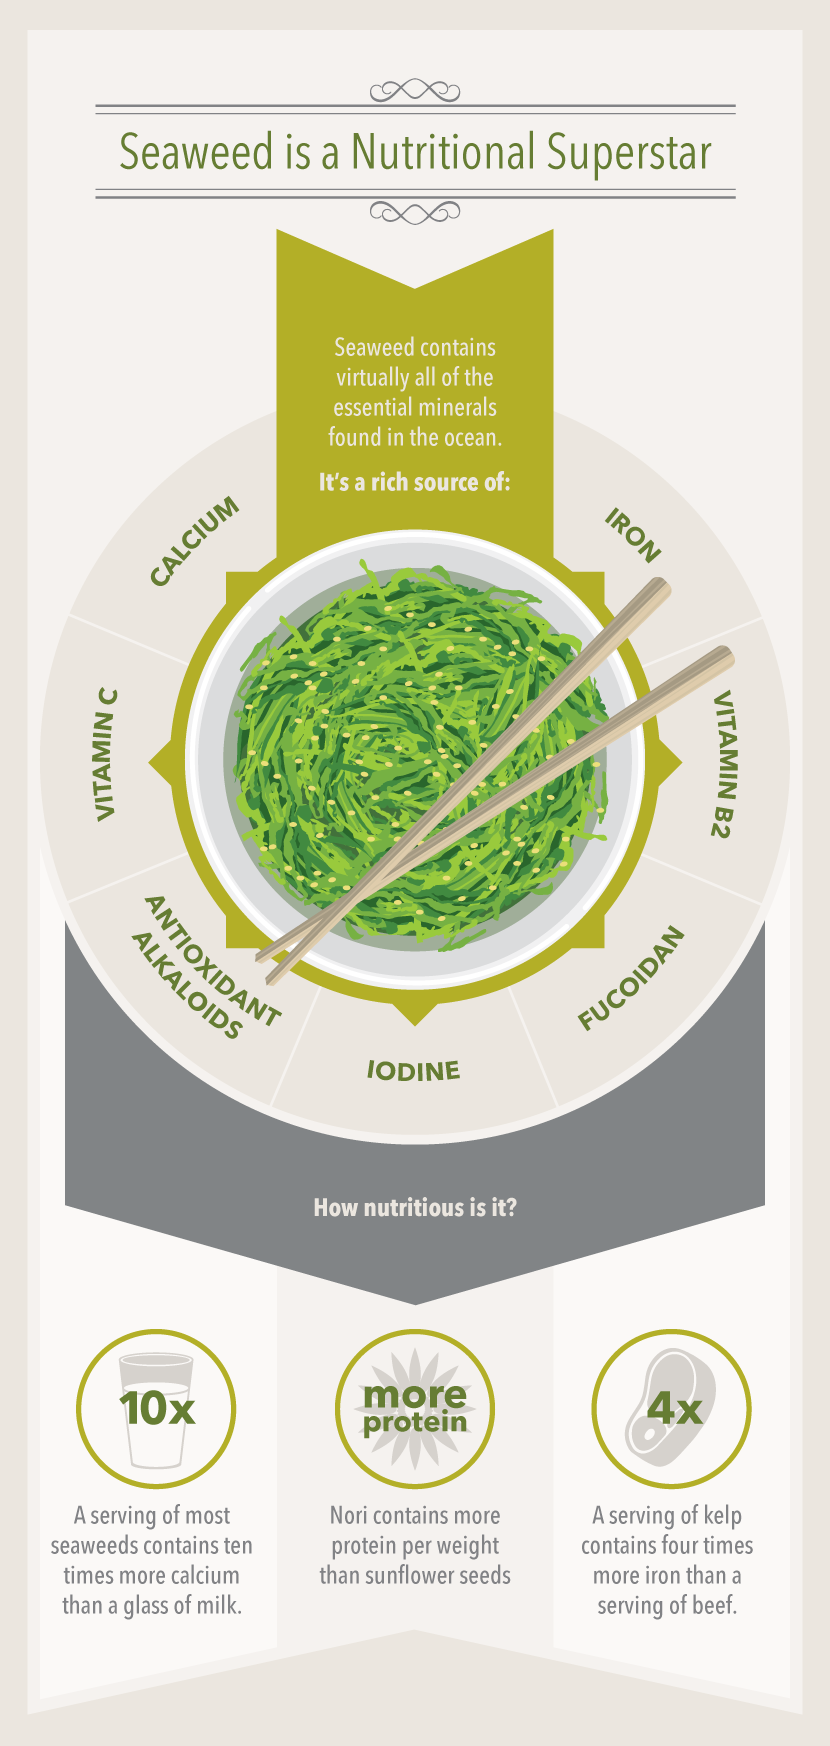 Seaweed is a Nutritional Superstar - A Guide to Eating Seaweed